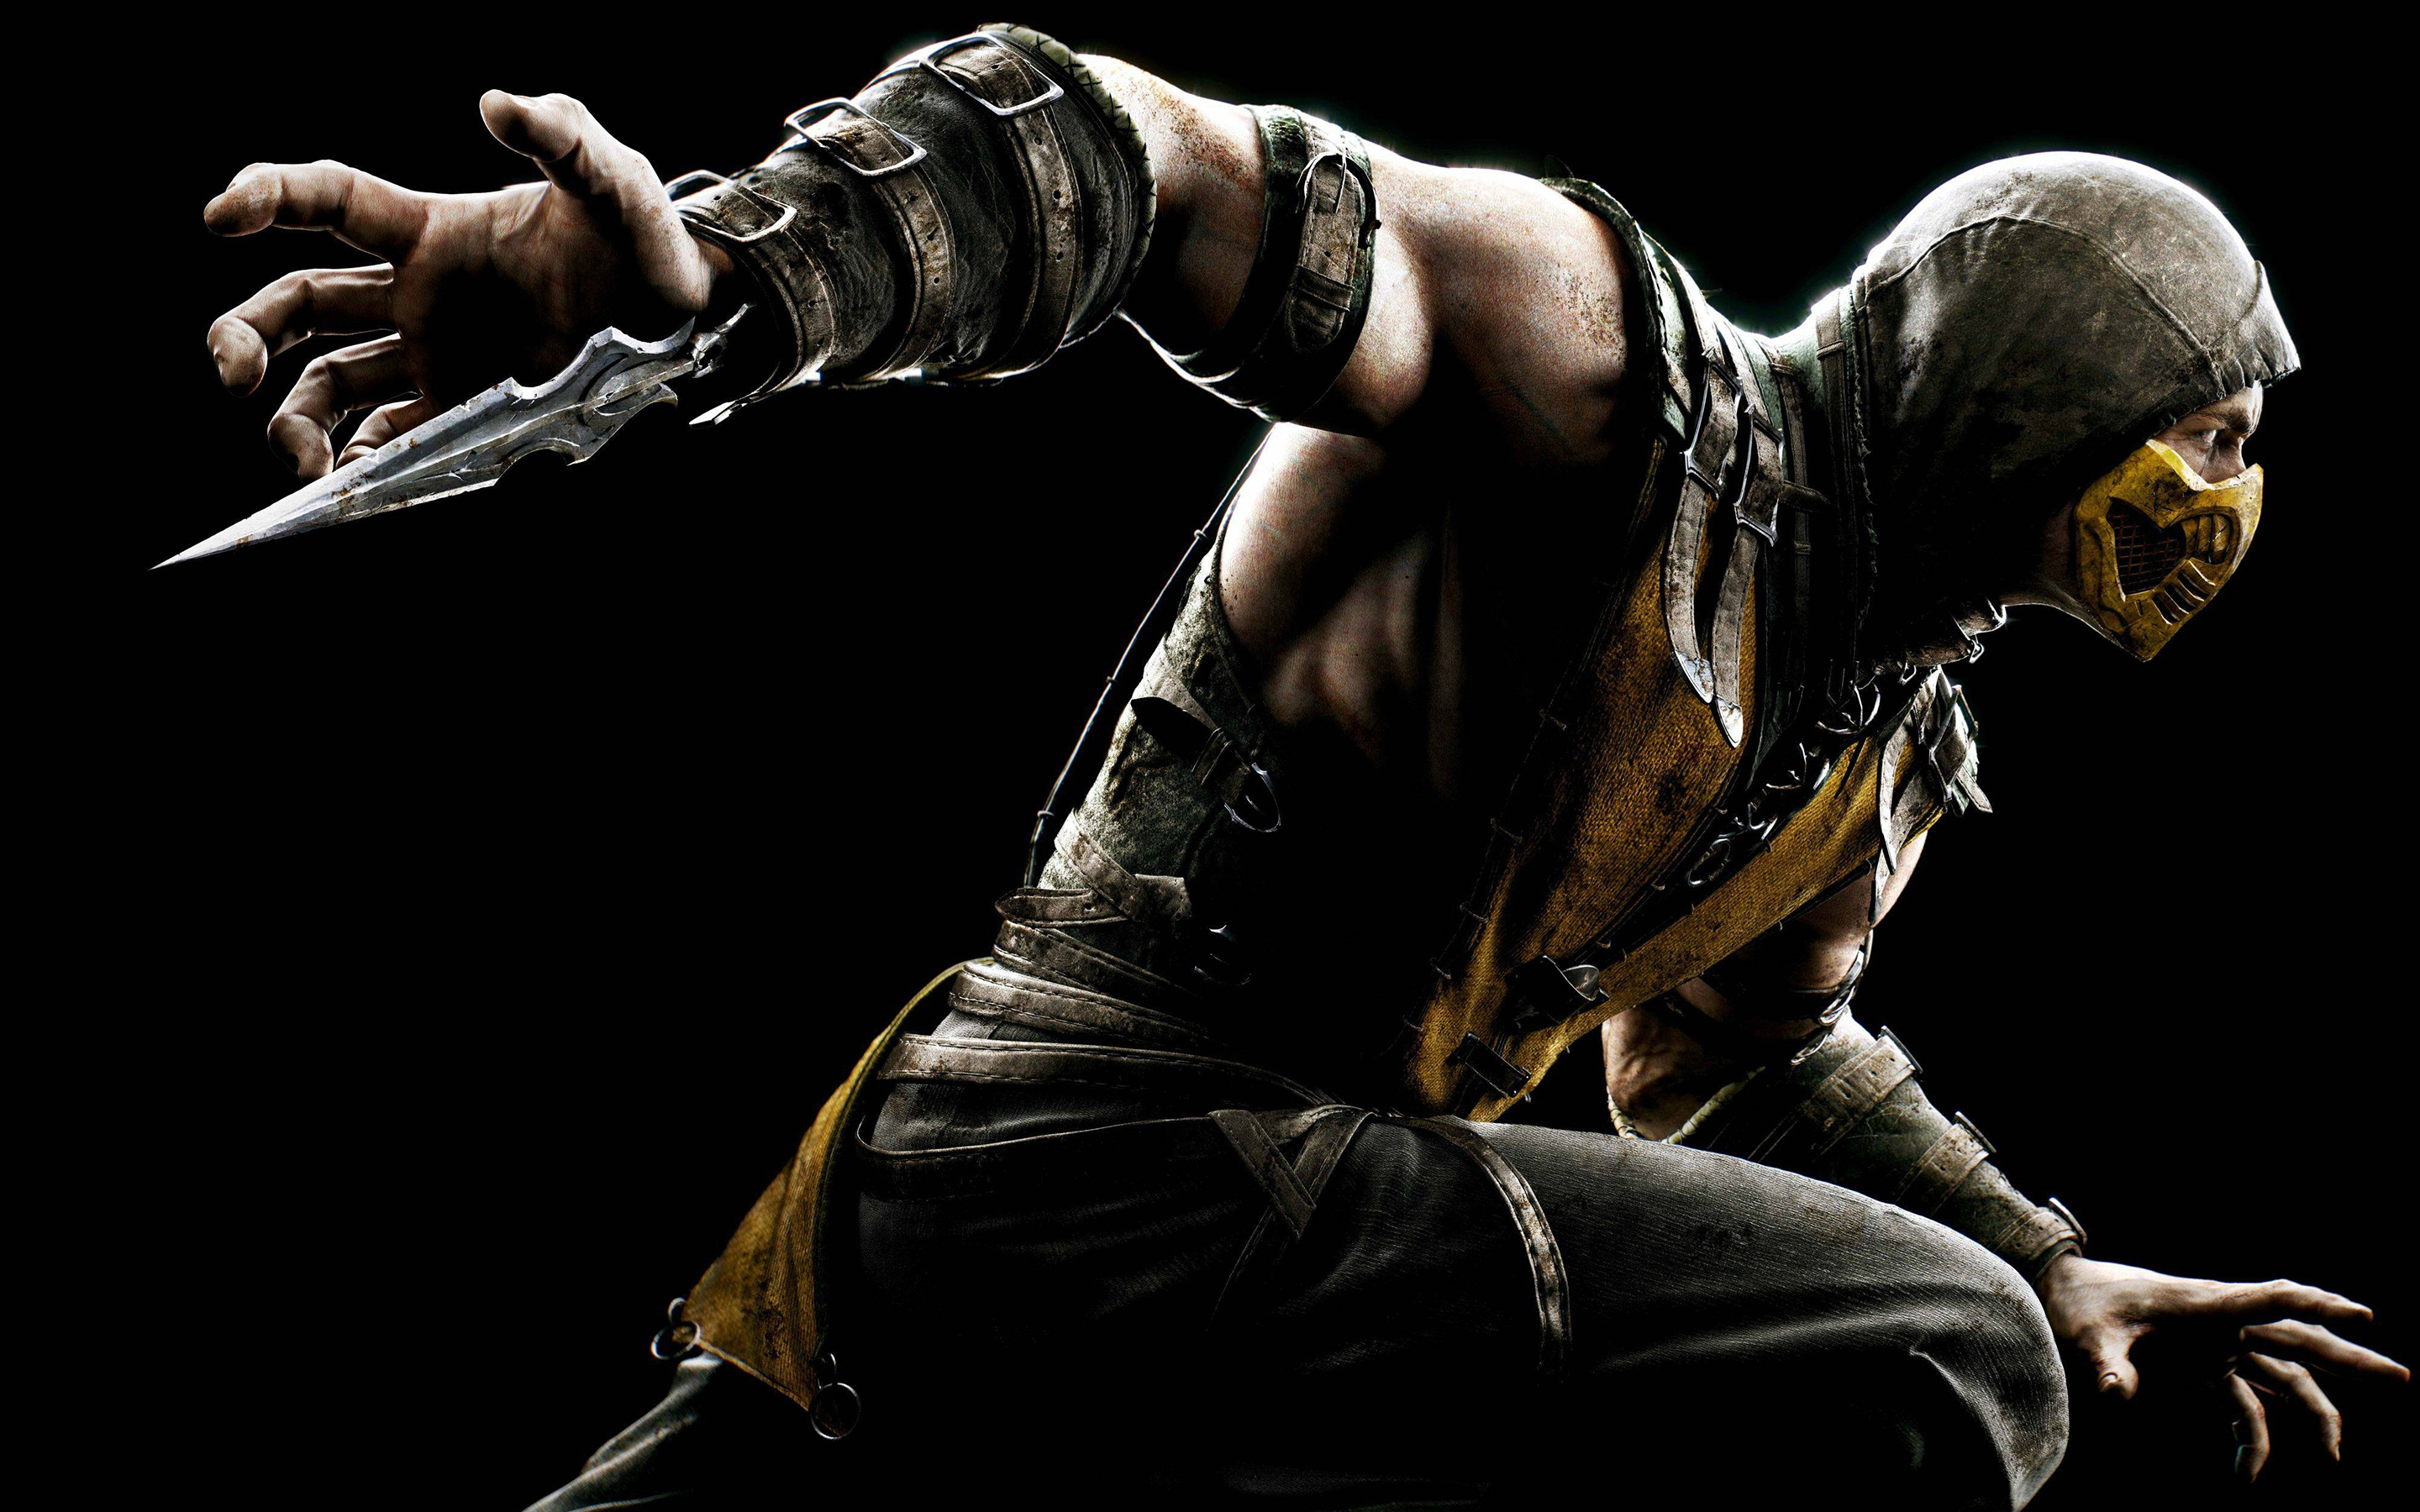 Heres another wallpaper I made Who should I try next  rMortalKombat